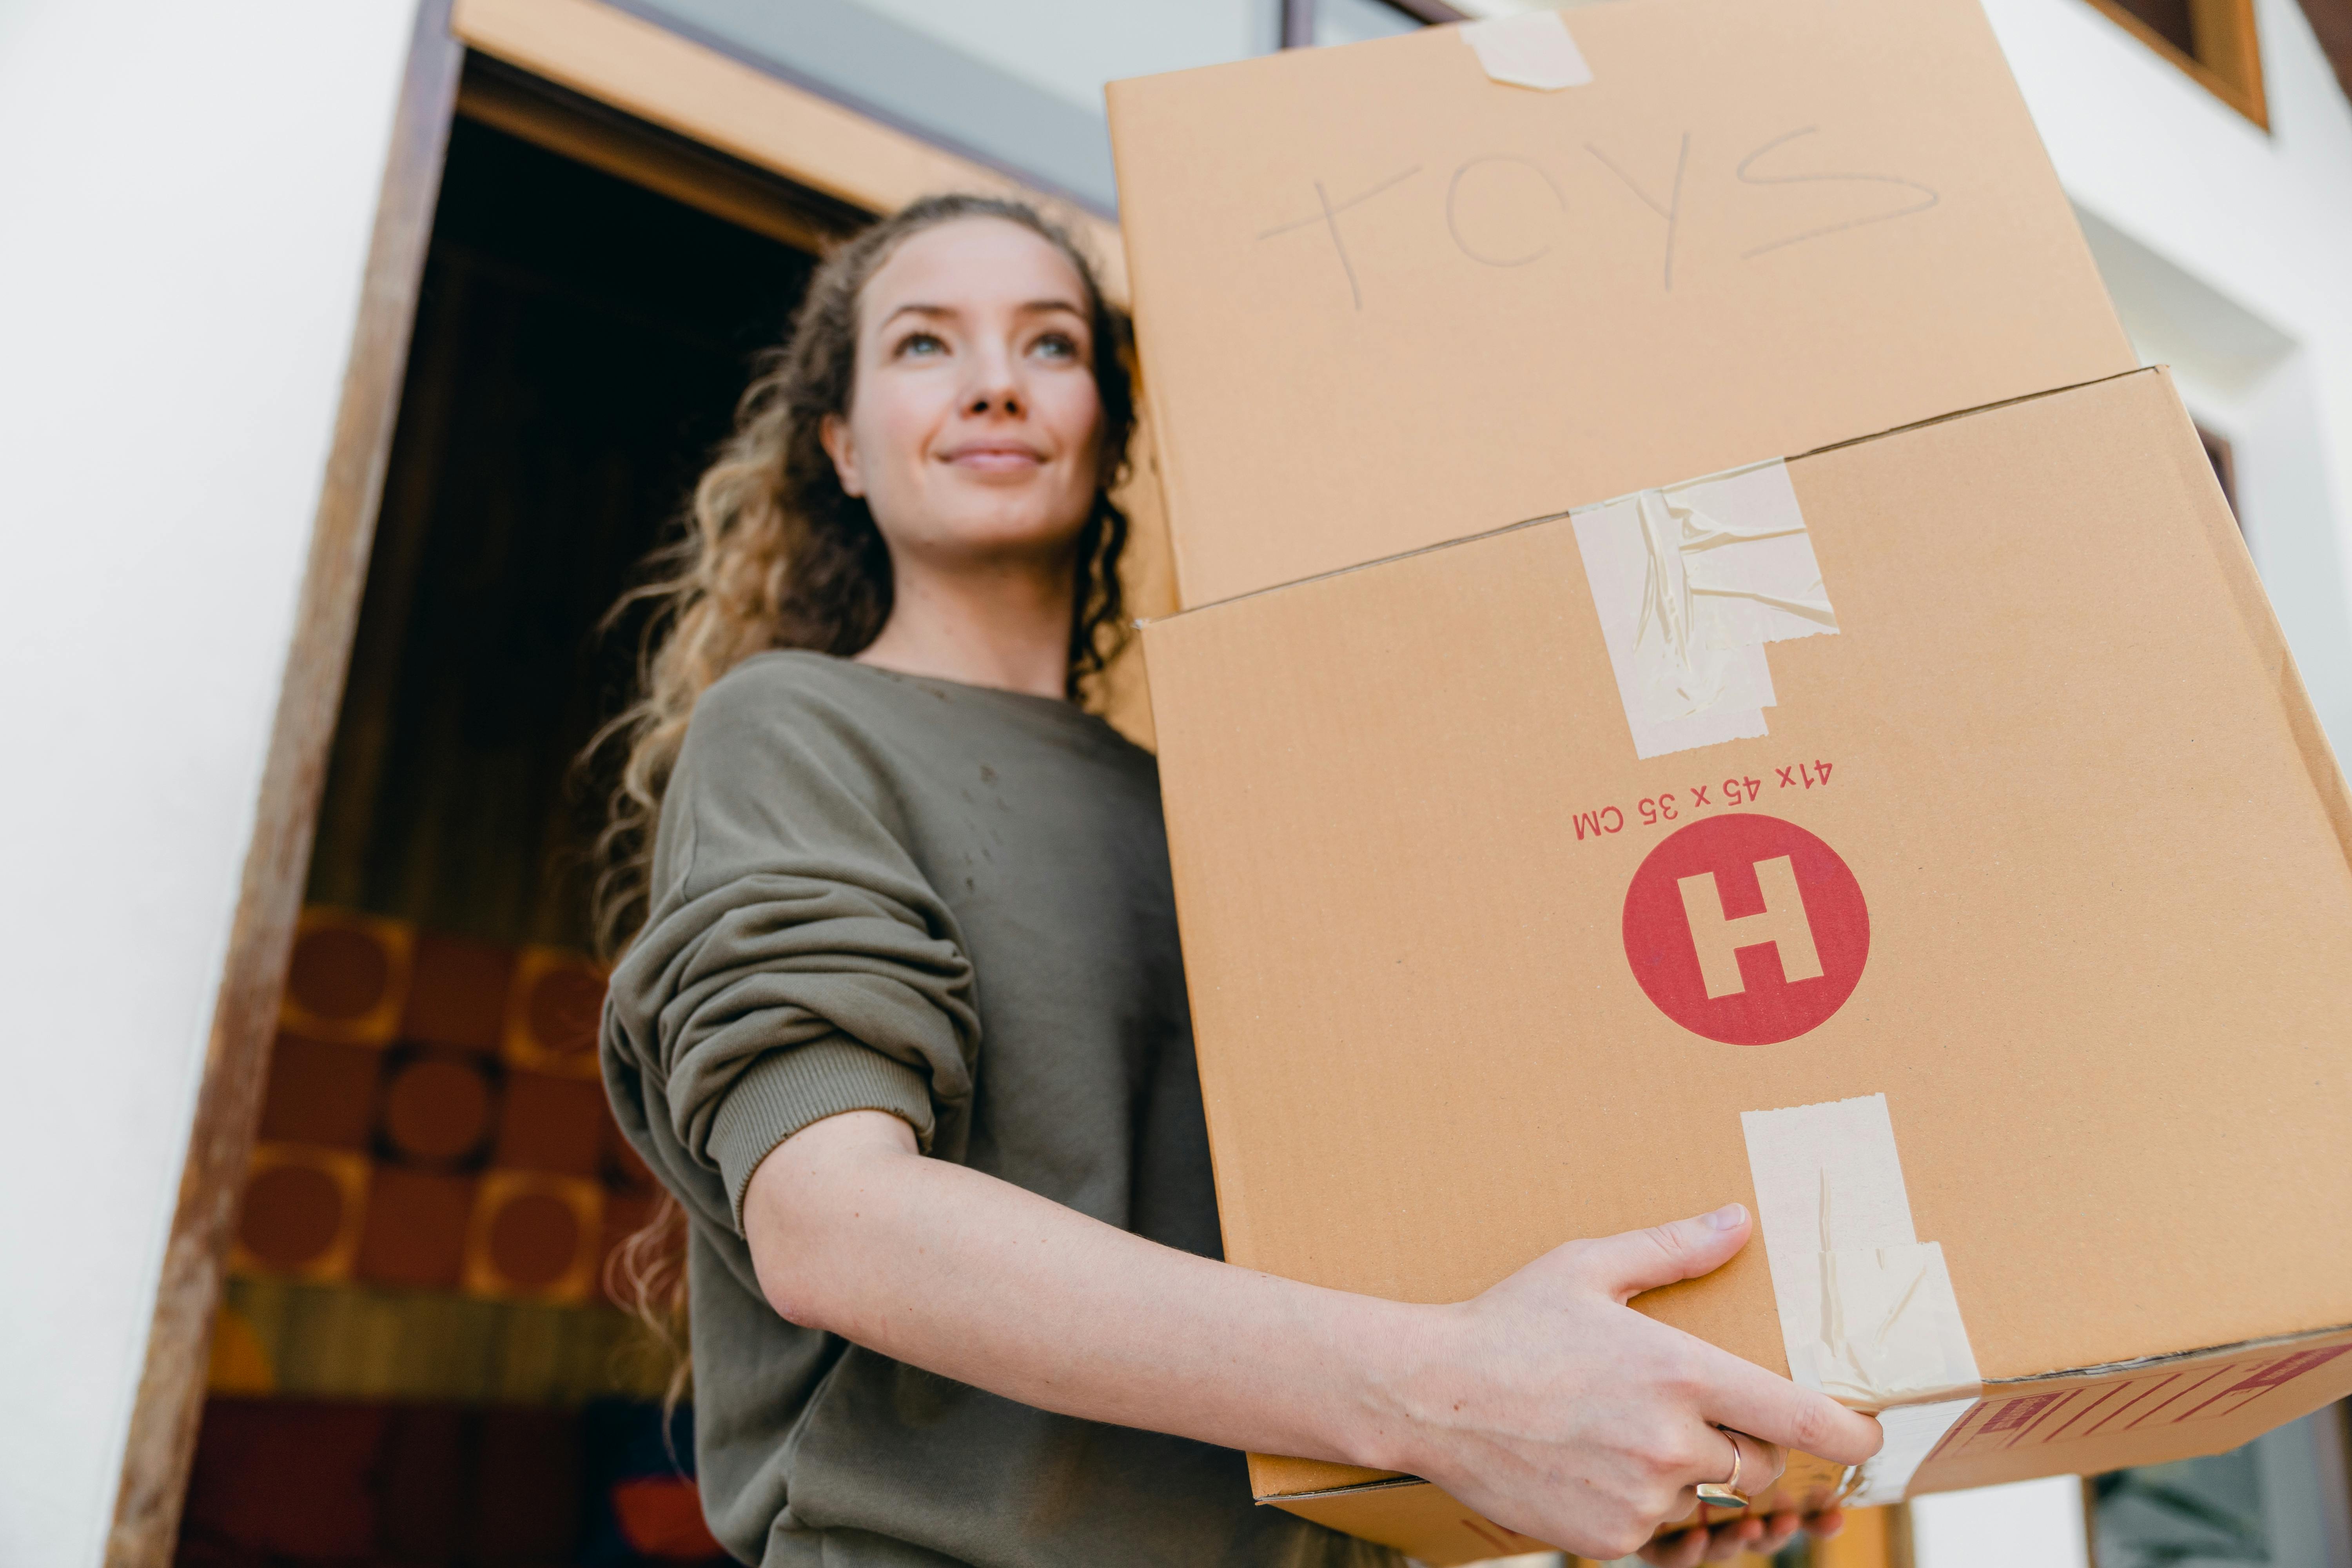 Woman carrying a pile of boxes | Source: Pexels